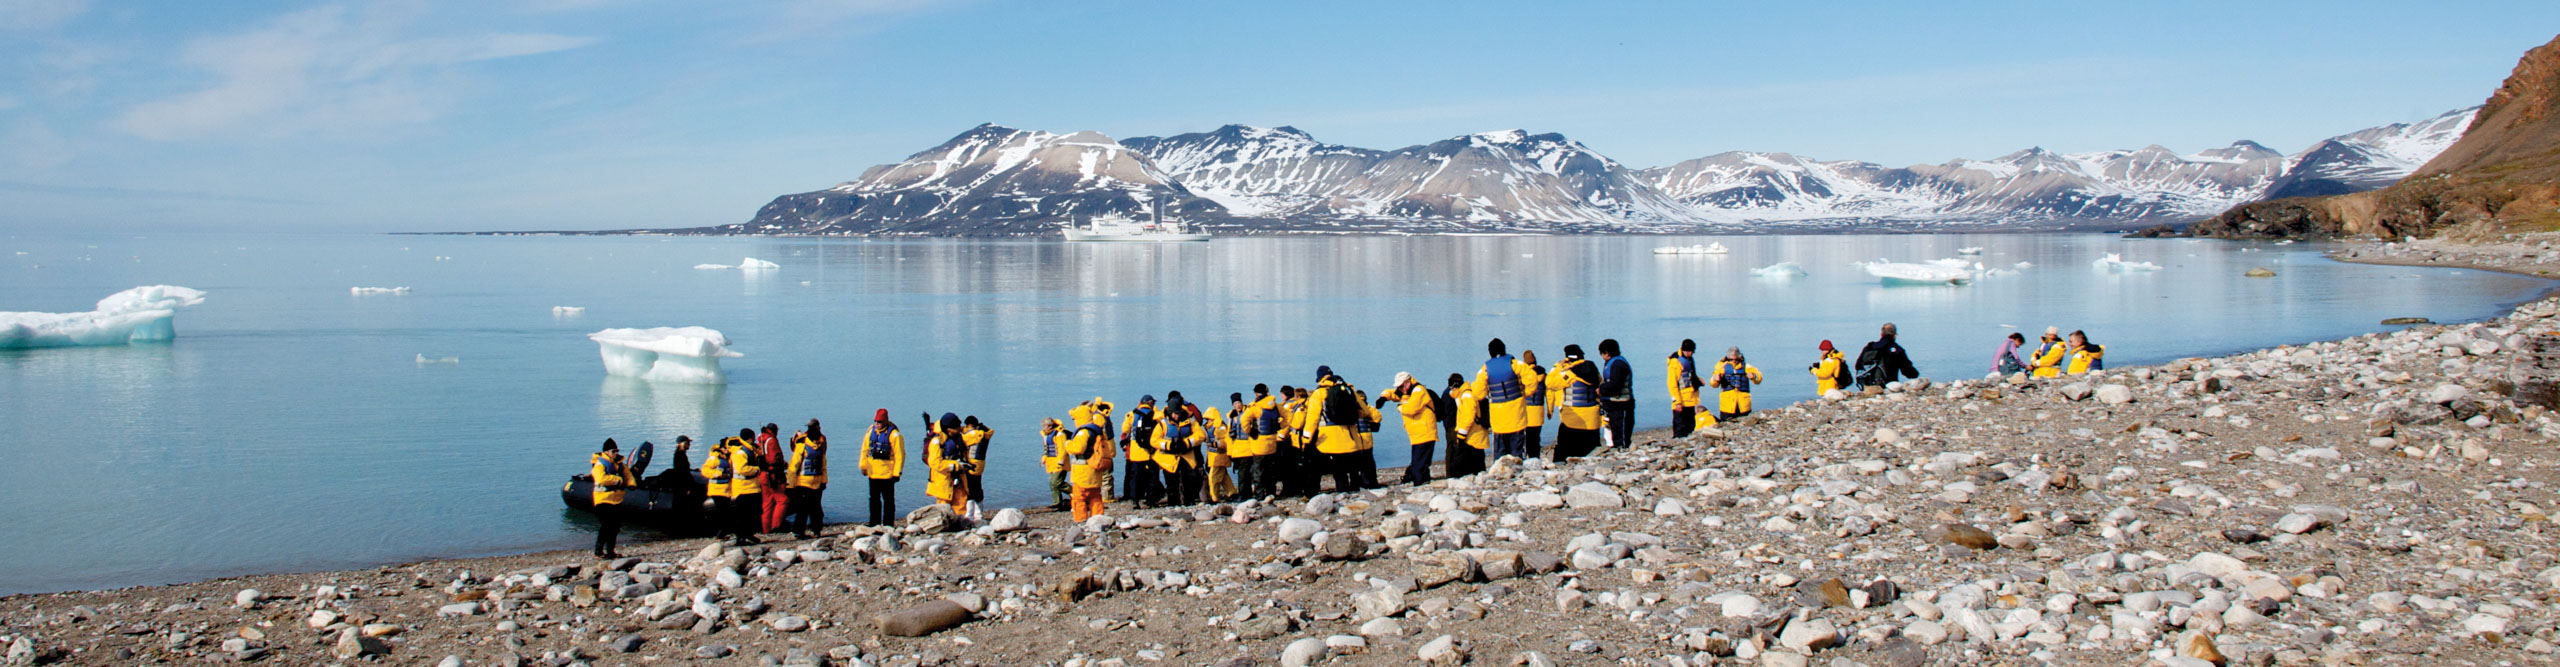 Group wearing yellow jackets on shoreline with icebergs in the distance on a sunny day in the Arctic